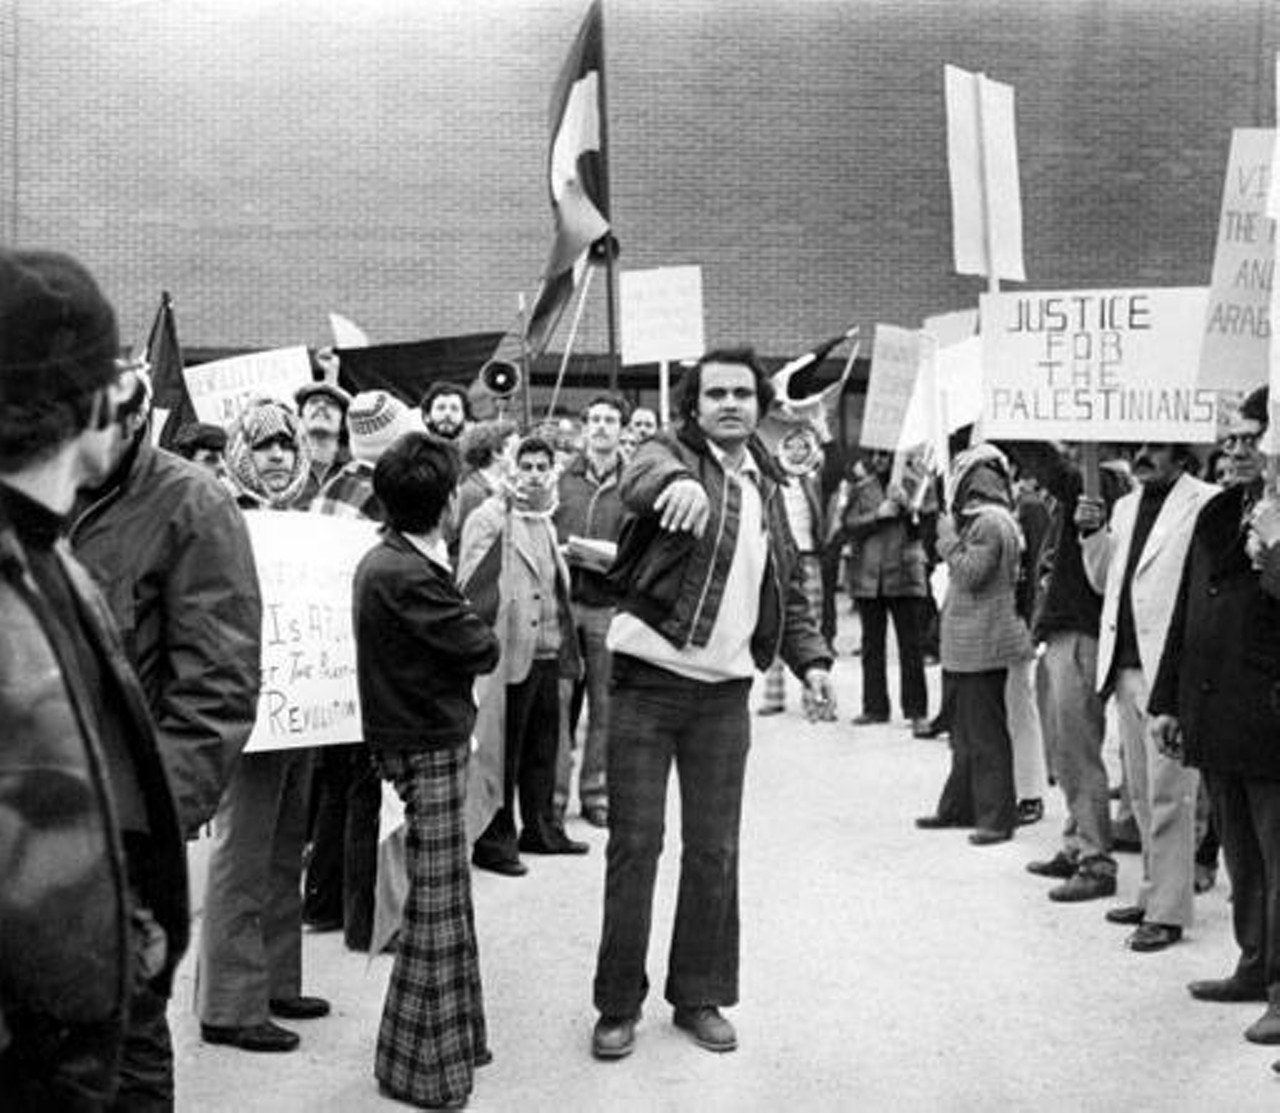 Anti-Israel protesters in front of Cuyahoga Community College West campus entrance, 1975.